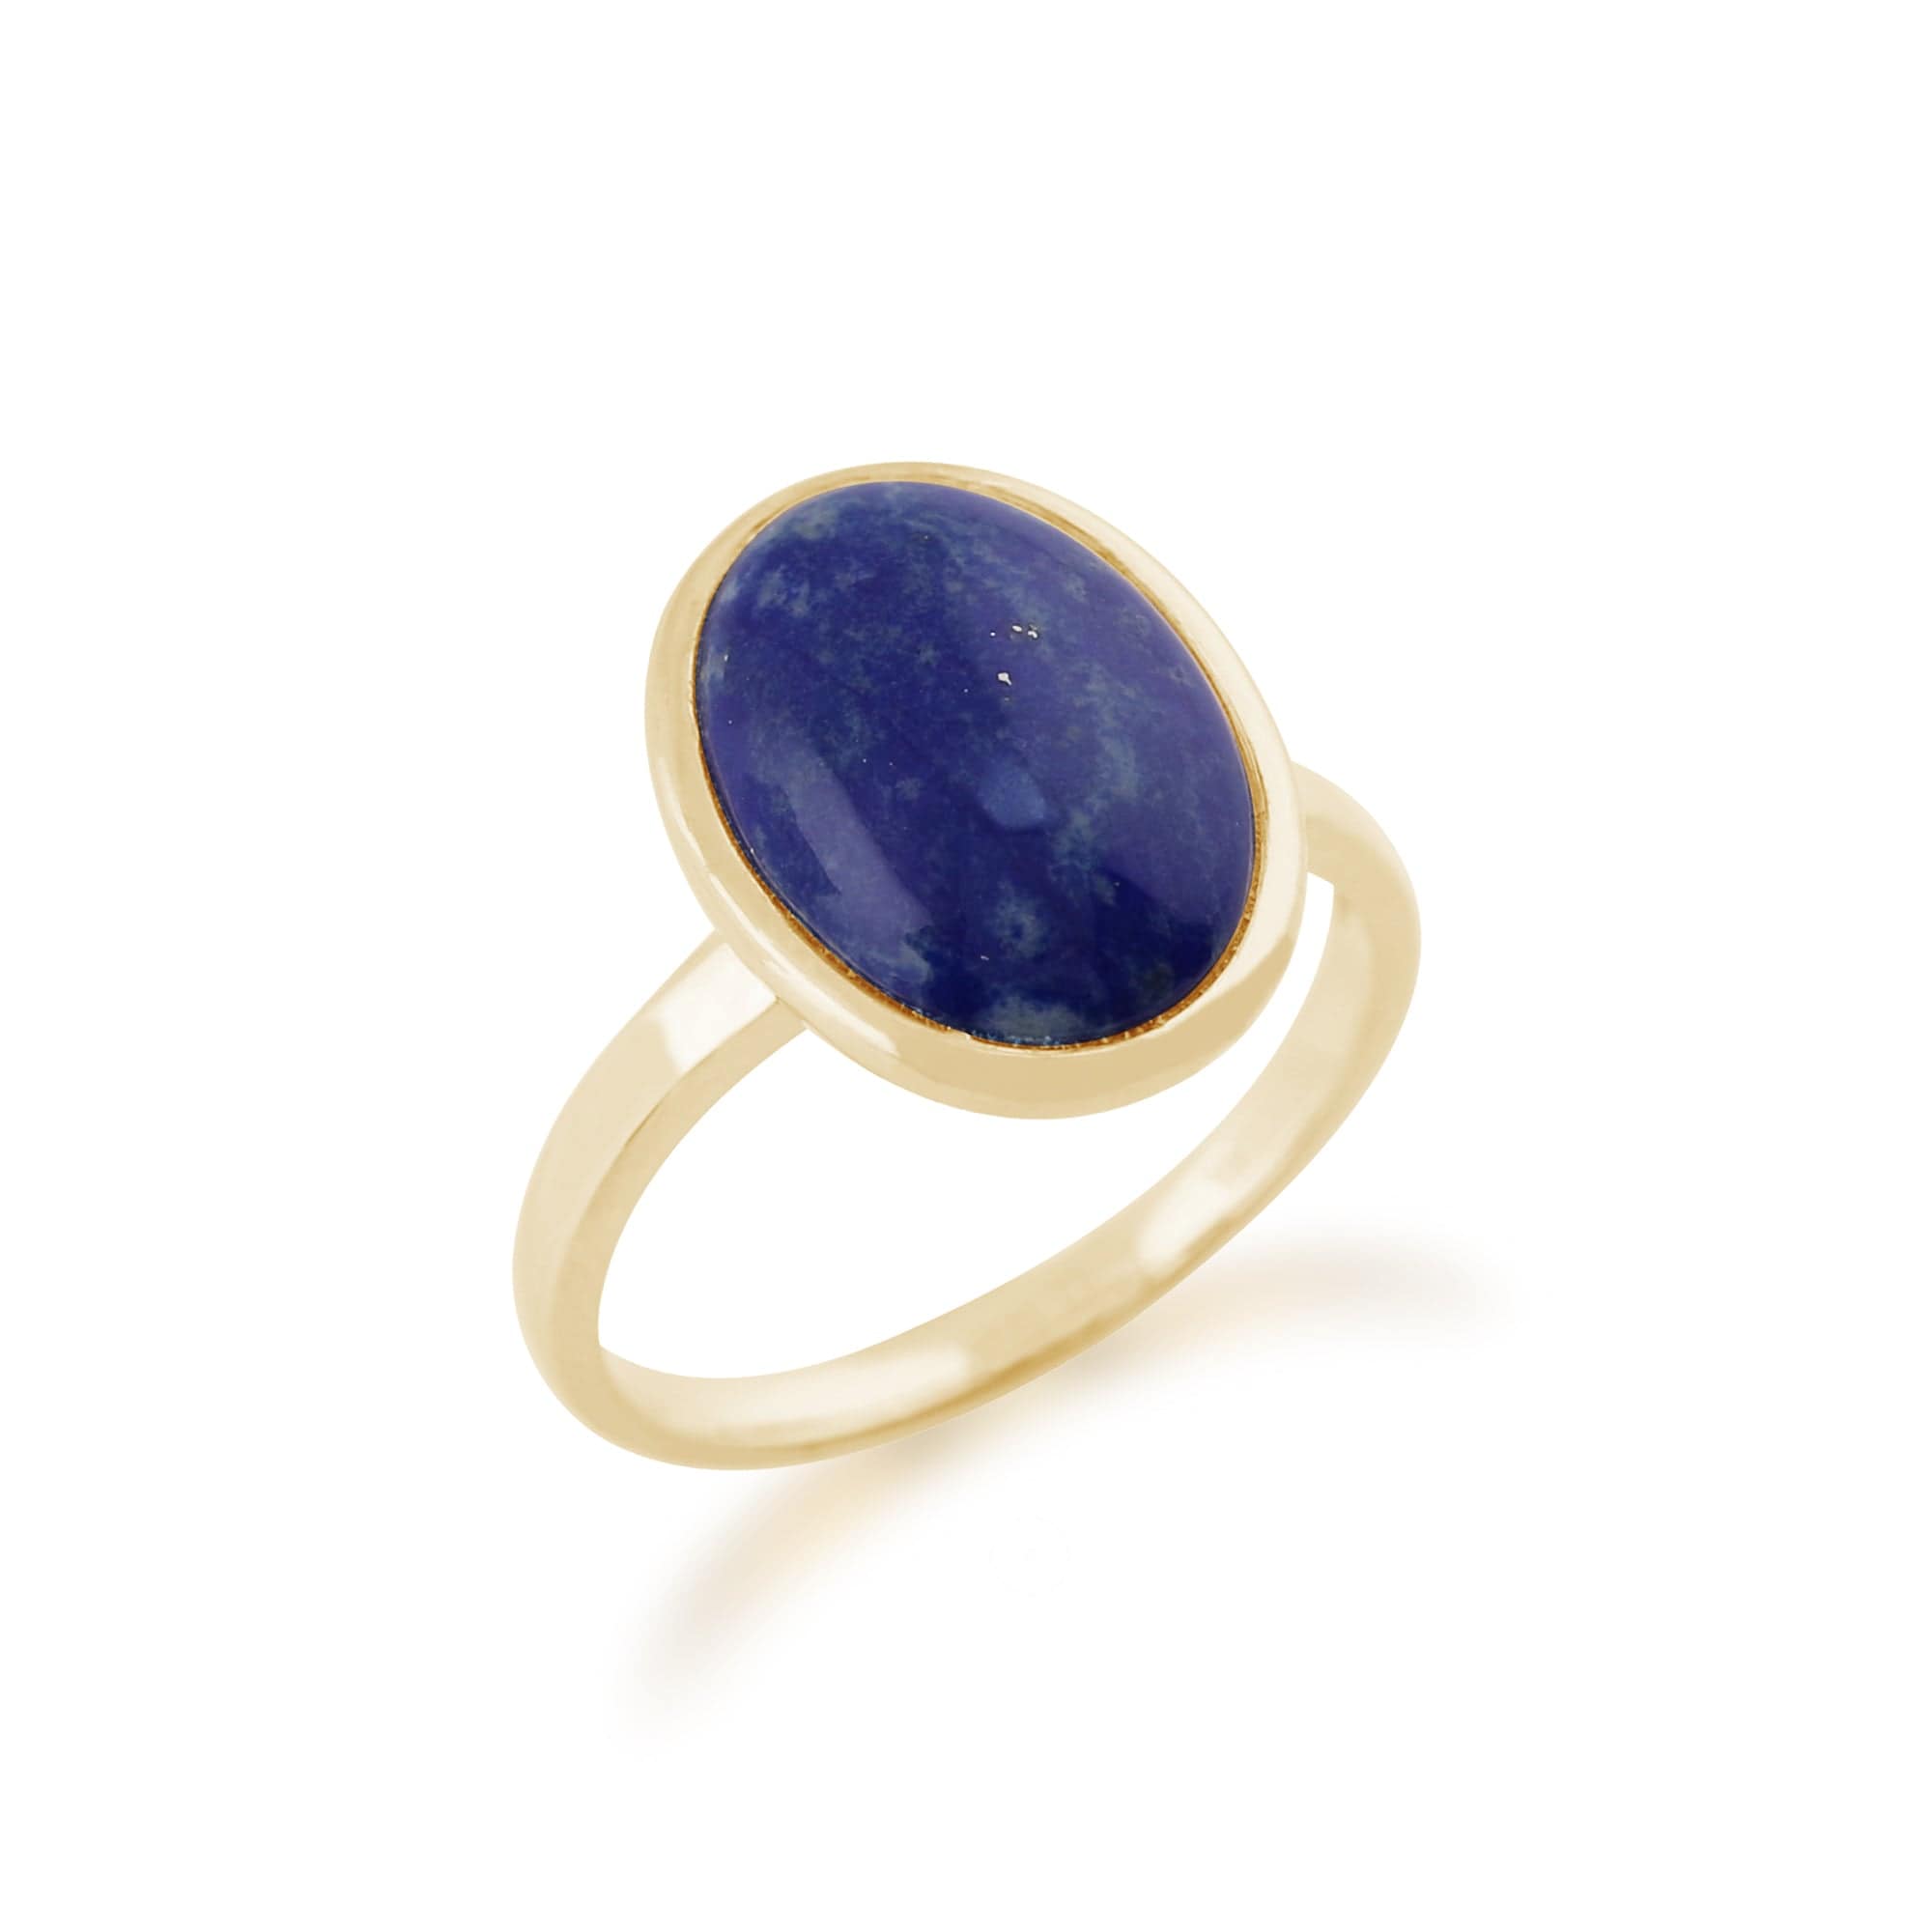 135R1250019 Statement Oval Lapis Lazuli Ring in 9ct Yellow Gold 3